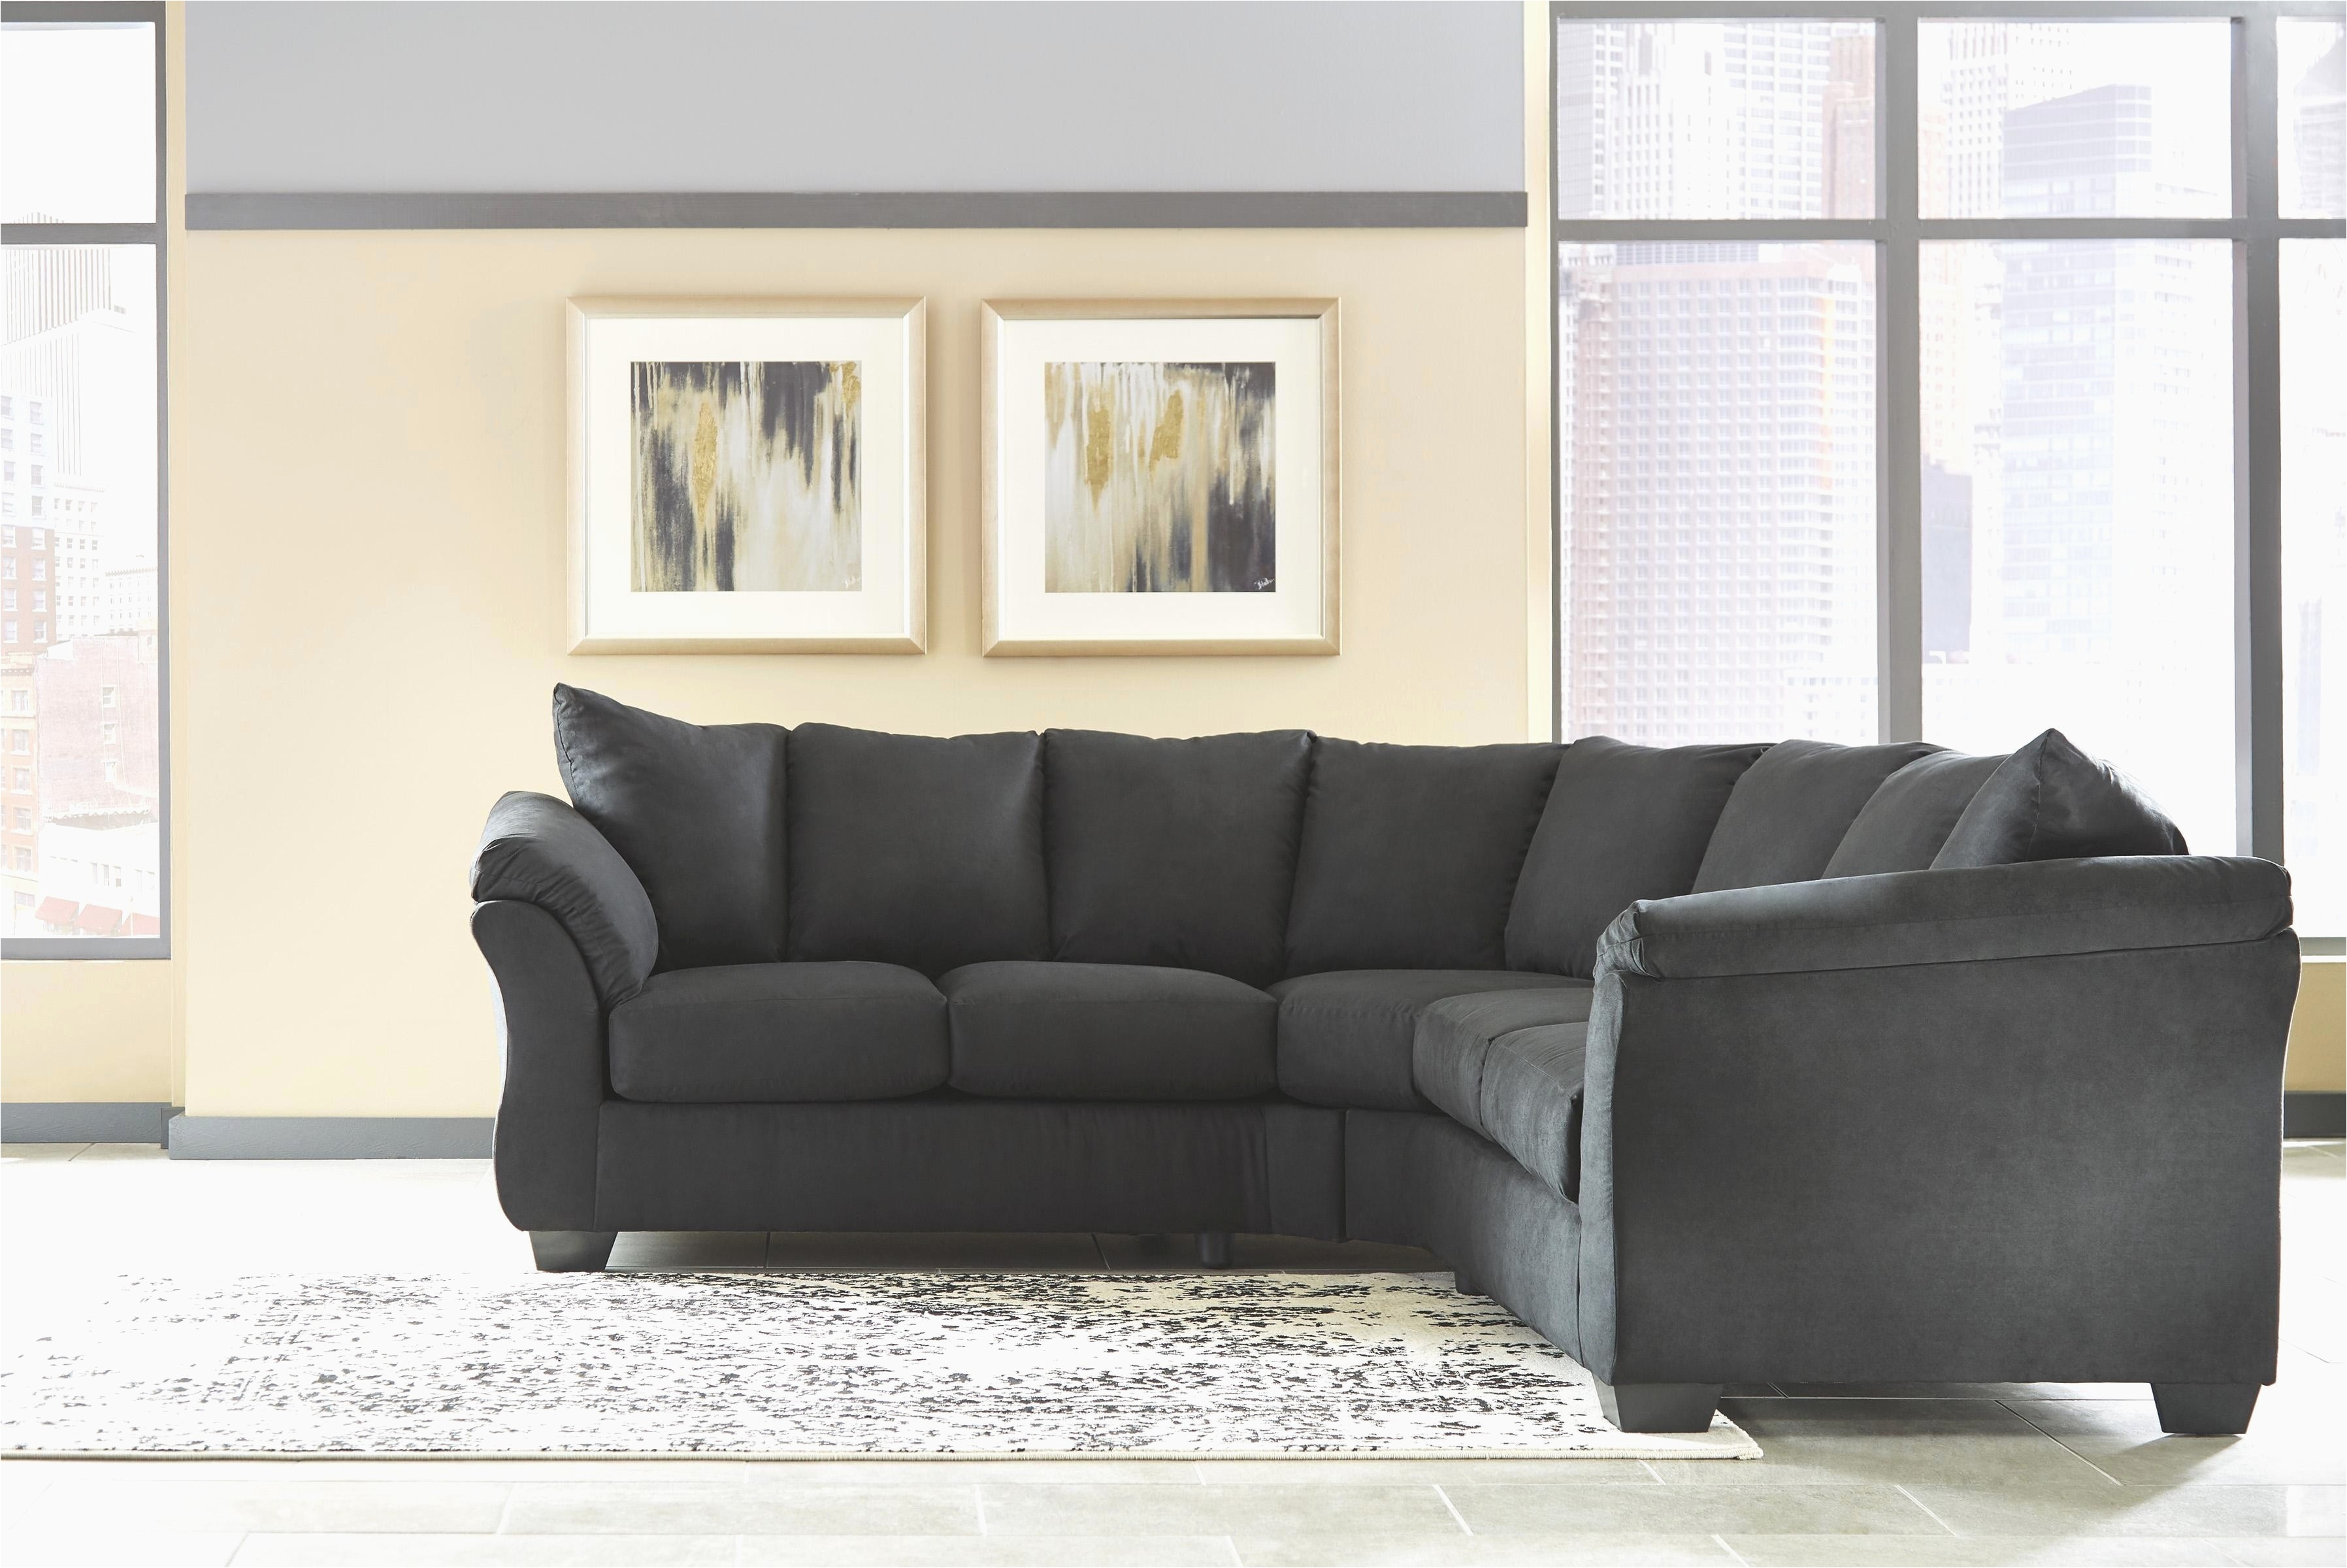 ergonomic living room chairs beautiful sectional couch 0d tags fabulous new sectional couch magnificent sectional sleeper 33 popular ashley home furniture